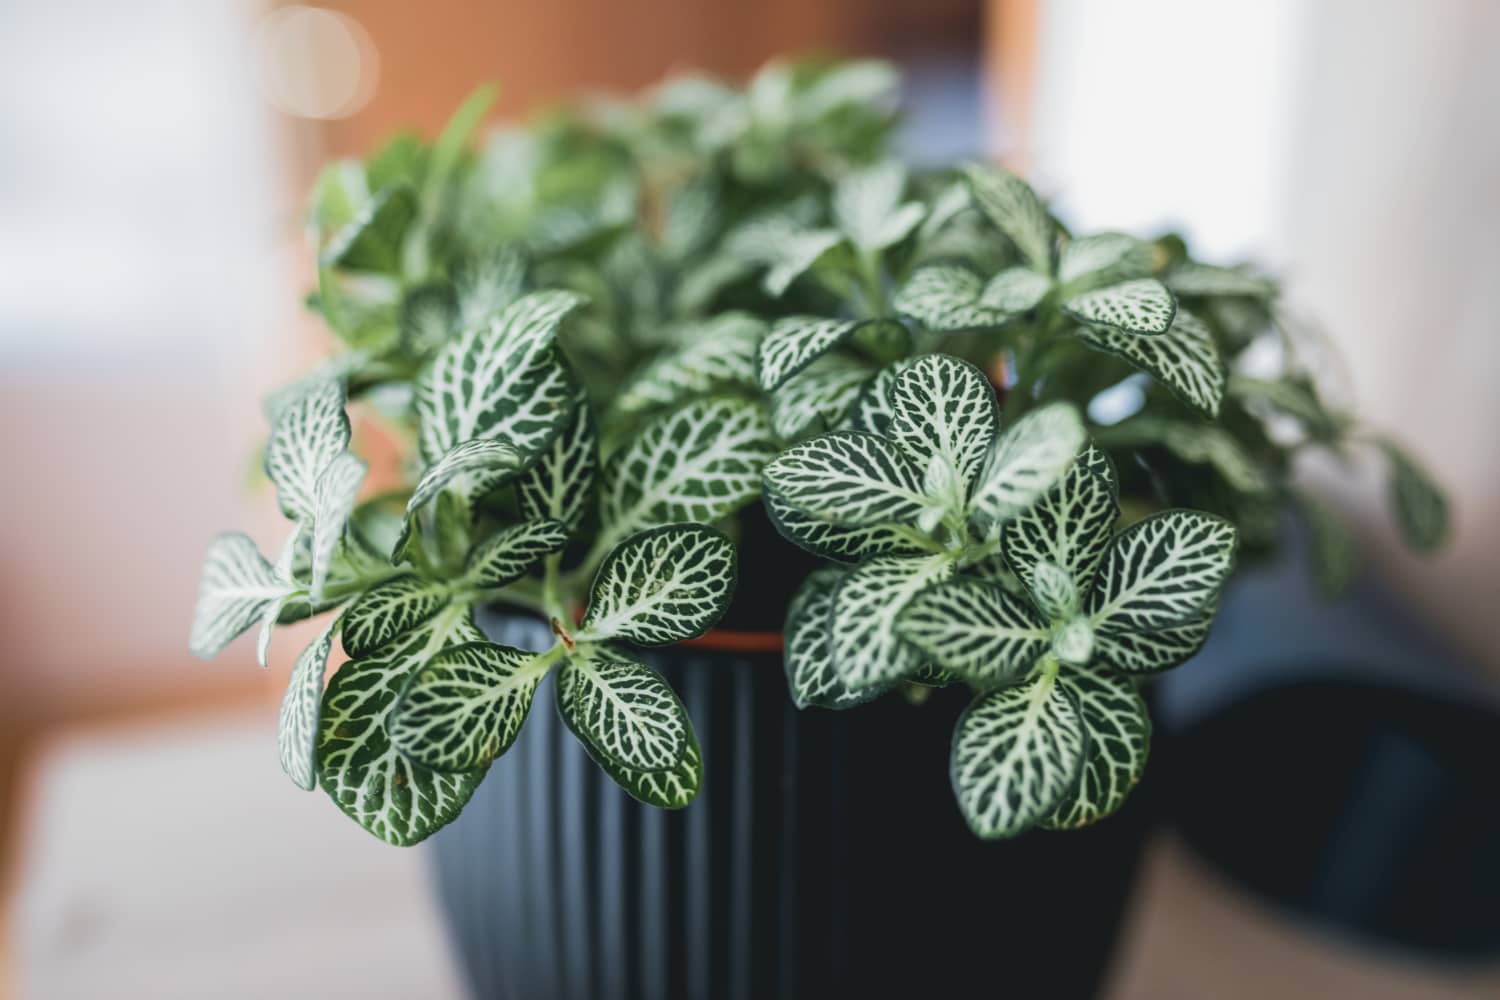 Fittonia Plant Care - How to Grow Nerve Plants | Apartment Therapy